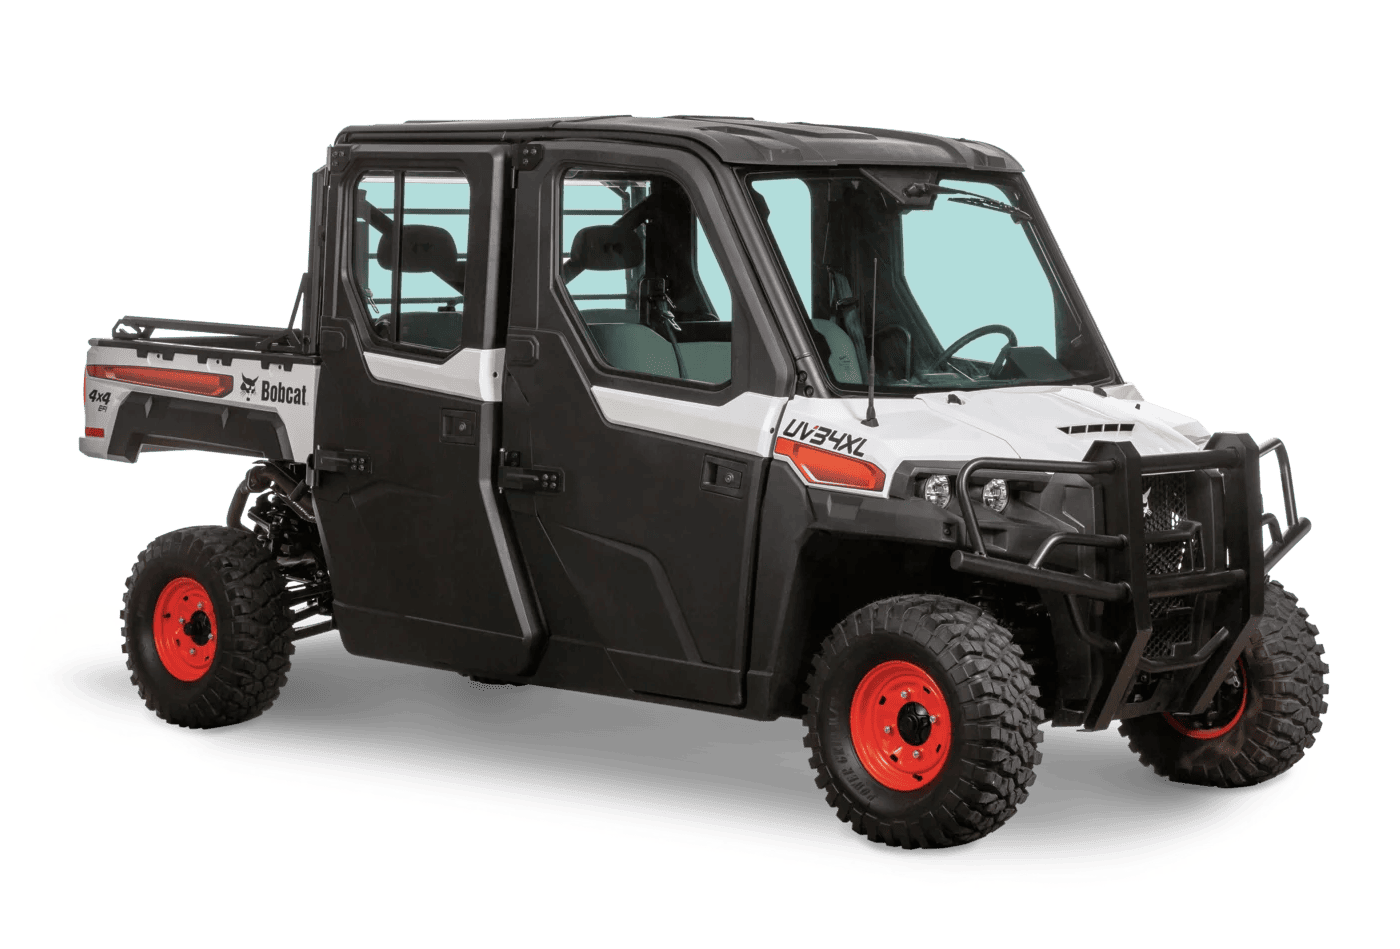 Browse Specs and more for the Bobcat UV34XL (Gas) Utility Vehicle - White Star Machinery